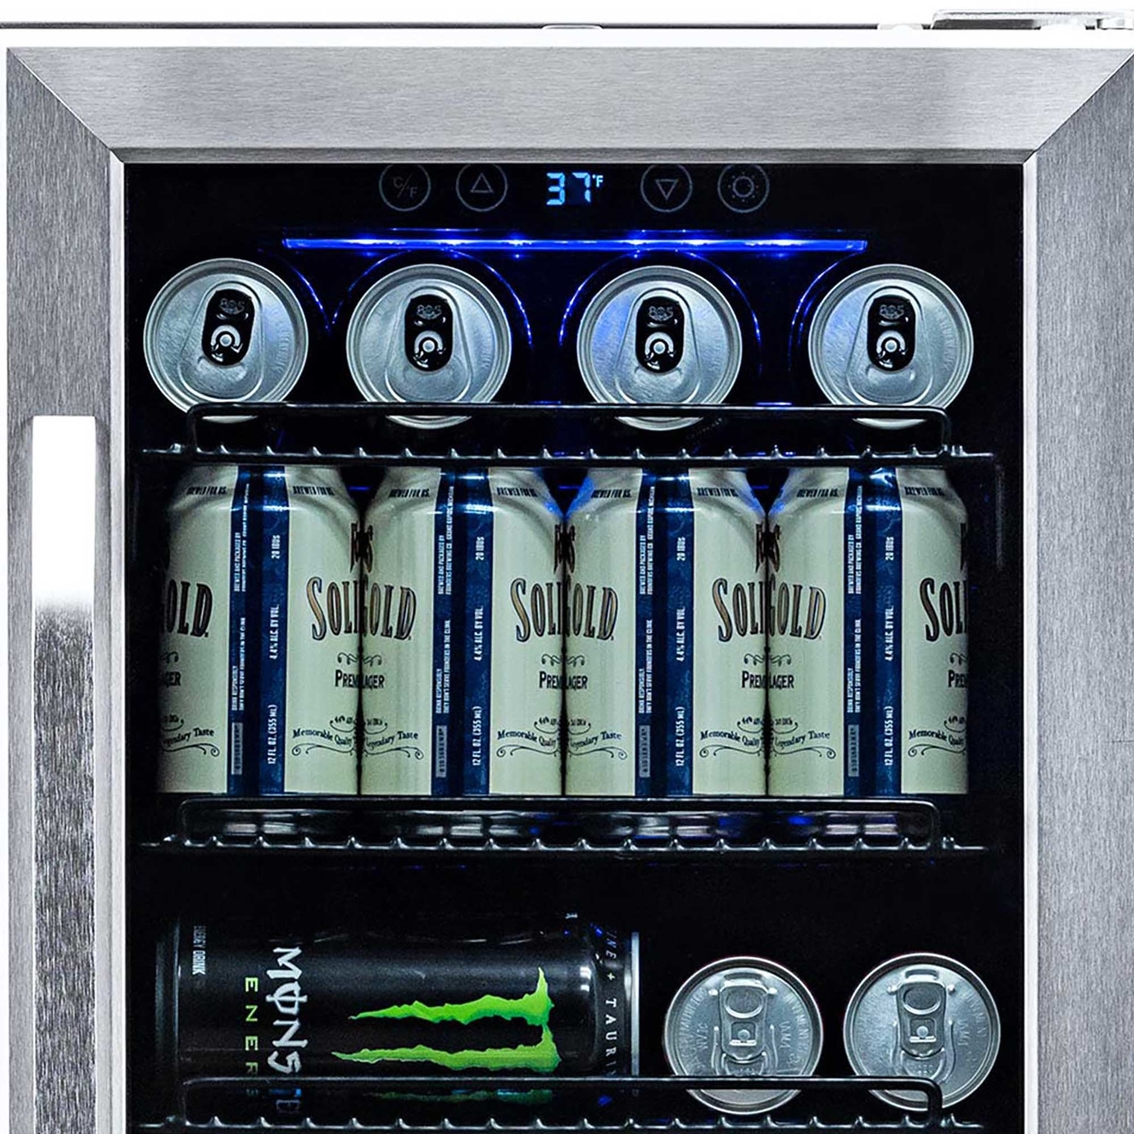 NewAir 15 in. 96 Can Beverage Cooler - Image 9 of 10